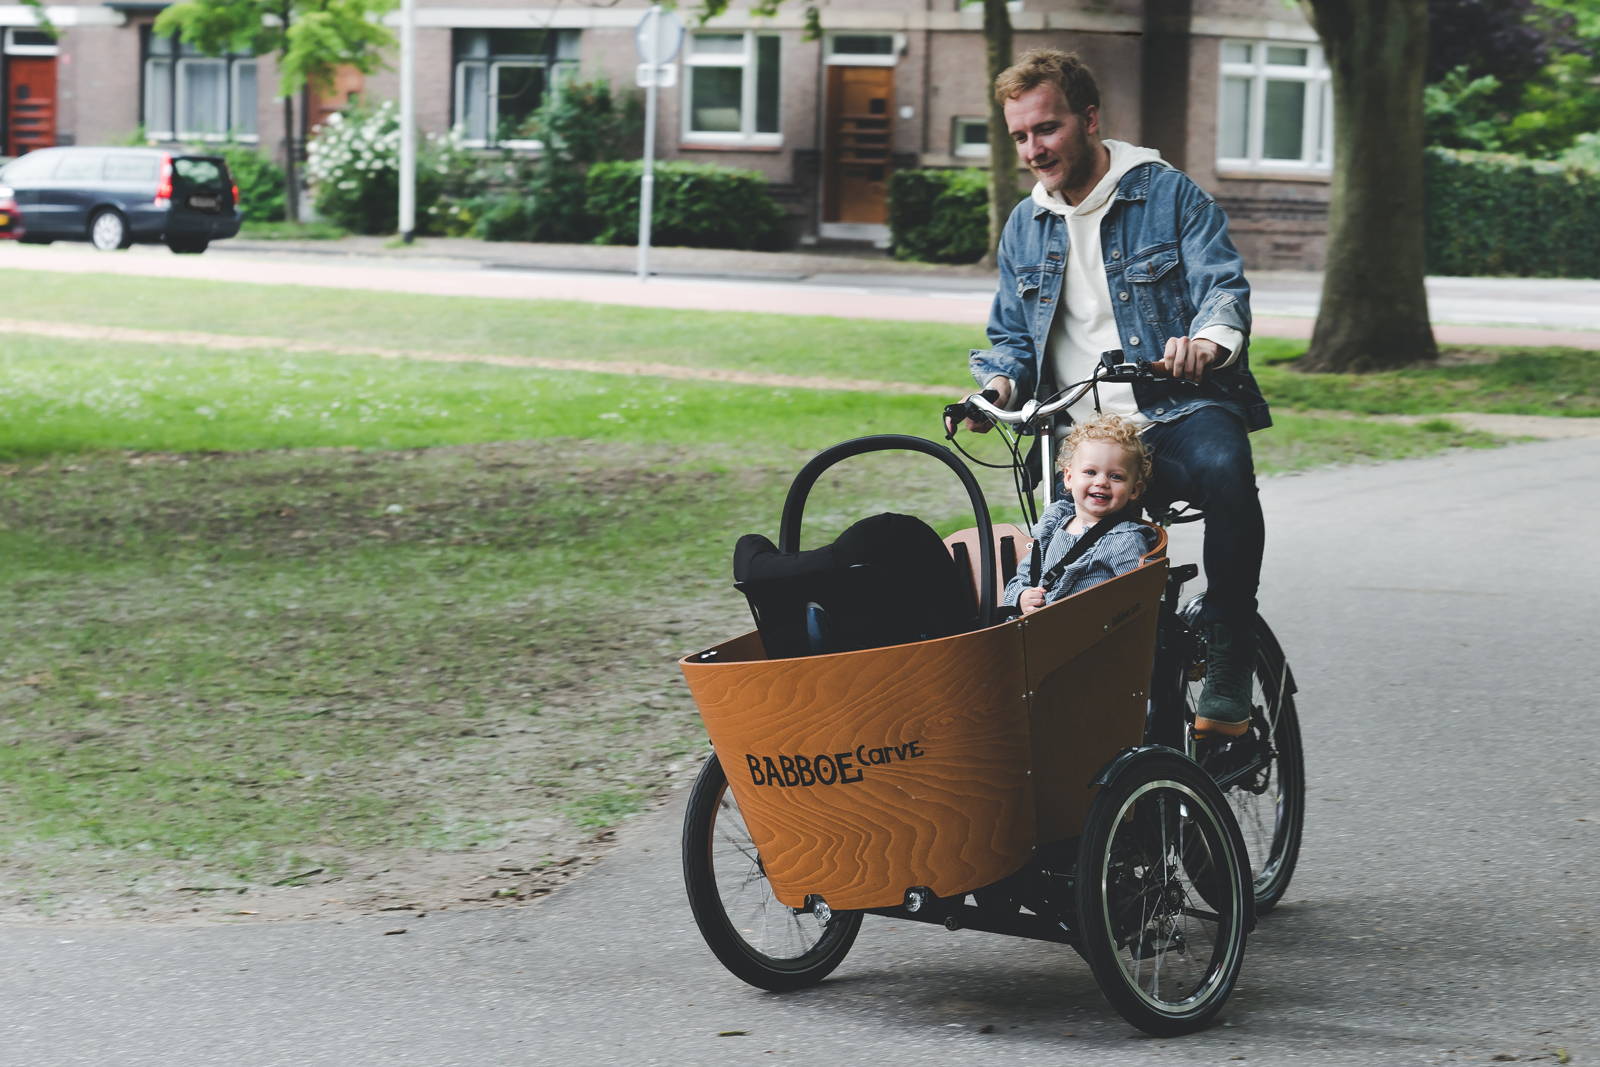 A father rides a Babboe Carve cargo bike with his two young children in the front box. The infant is riding in a Maxi Cosi car seat strapped in with a Maxi Cosi Adapter.